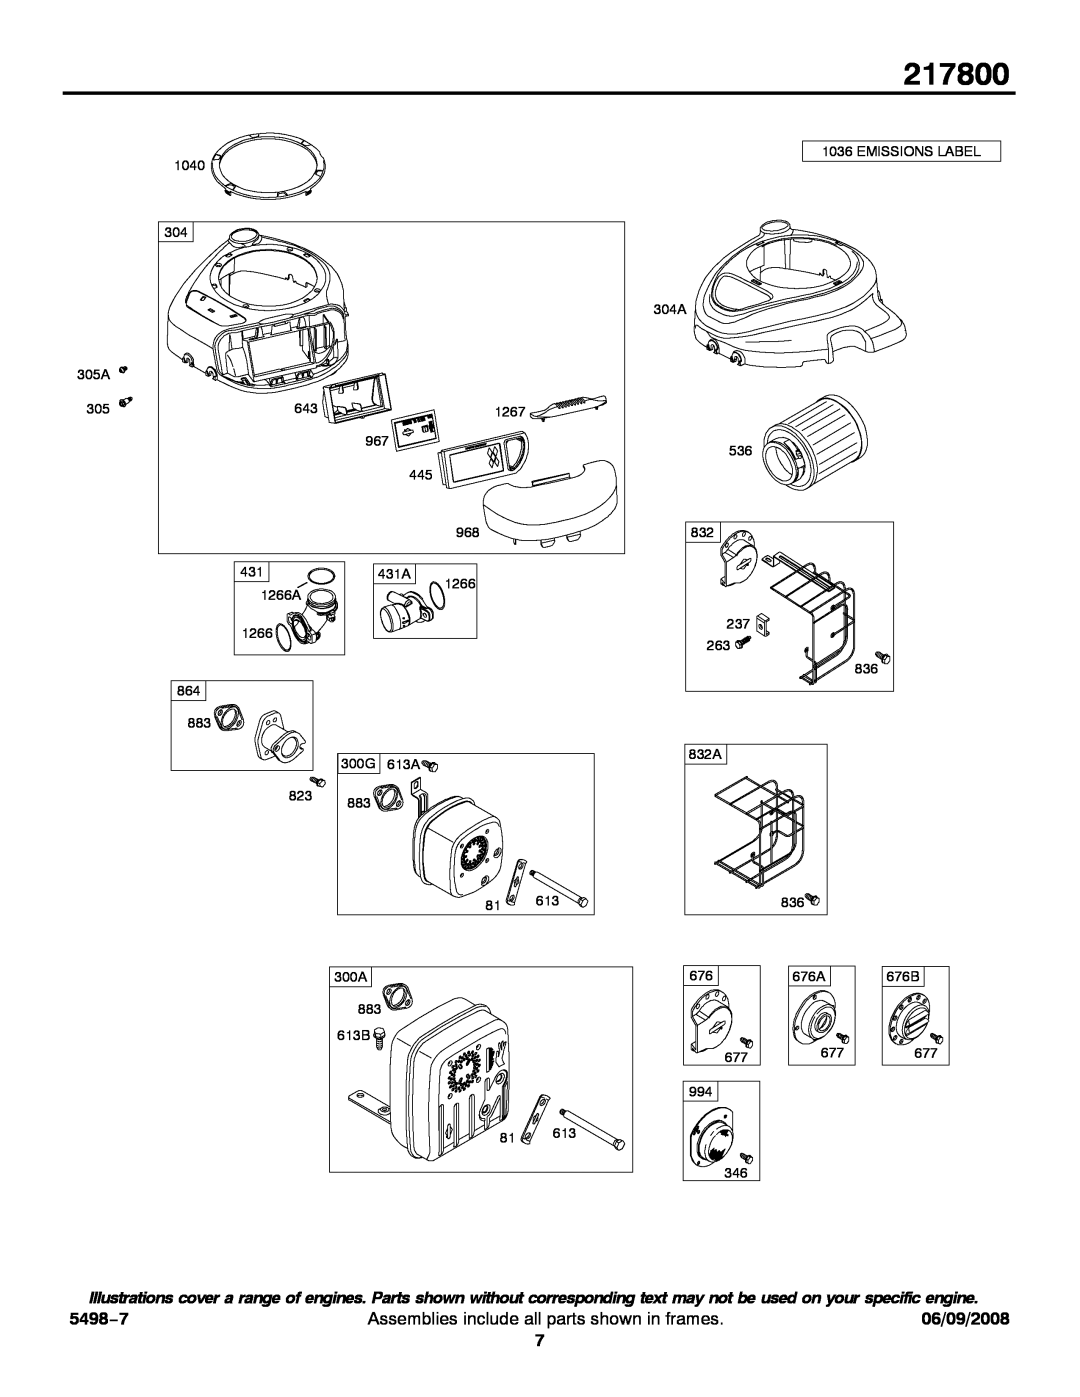 Briggs & Stratton 217800 service manual 5498−7, Assemblies include all parts shown in frames, 06/09/2008 